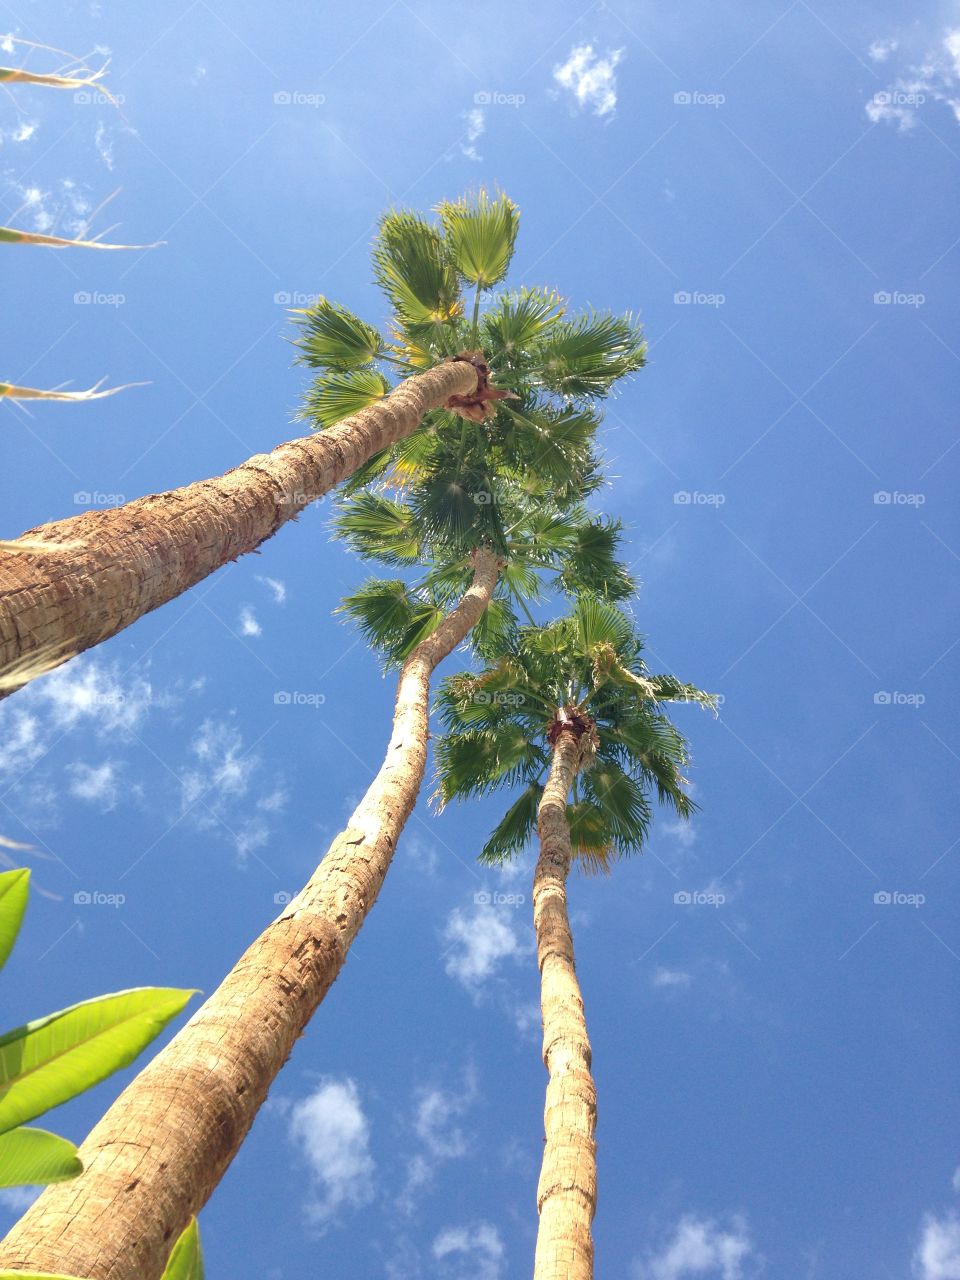 Looking up at palm trees in Palm Springs